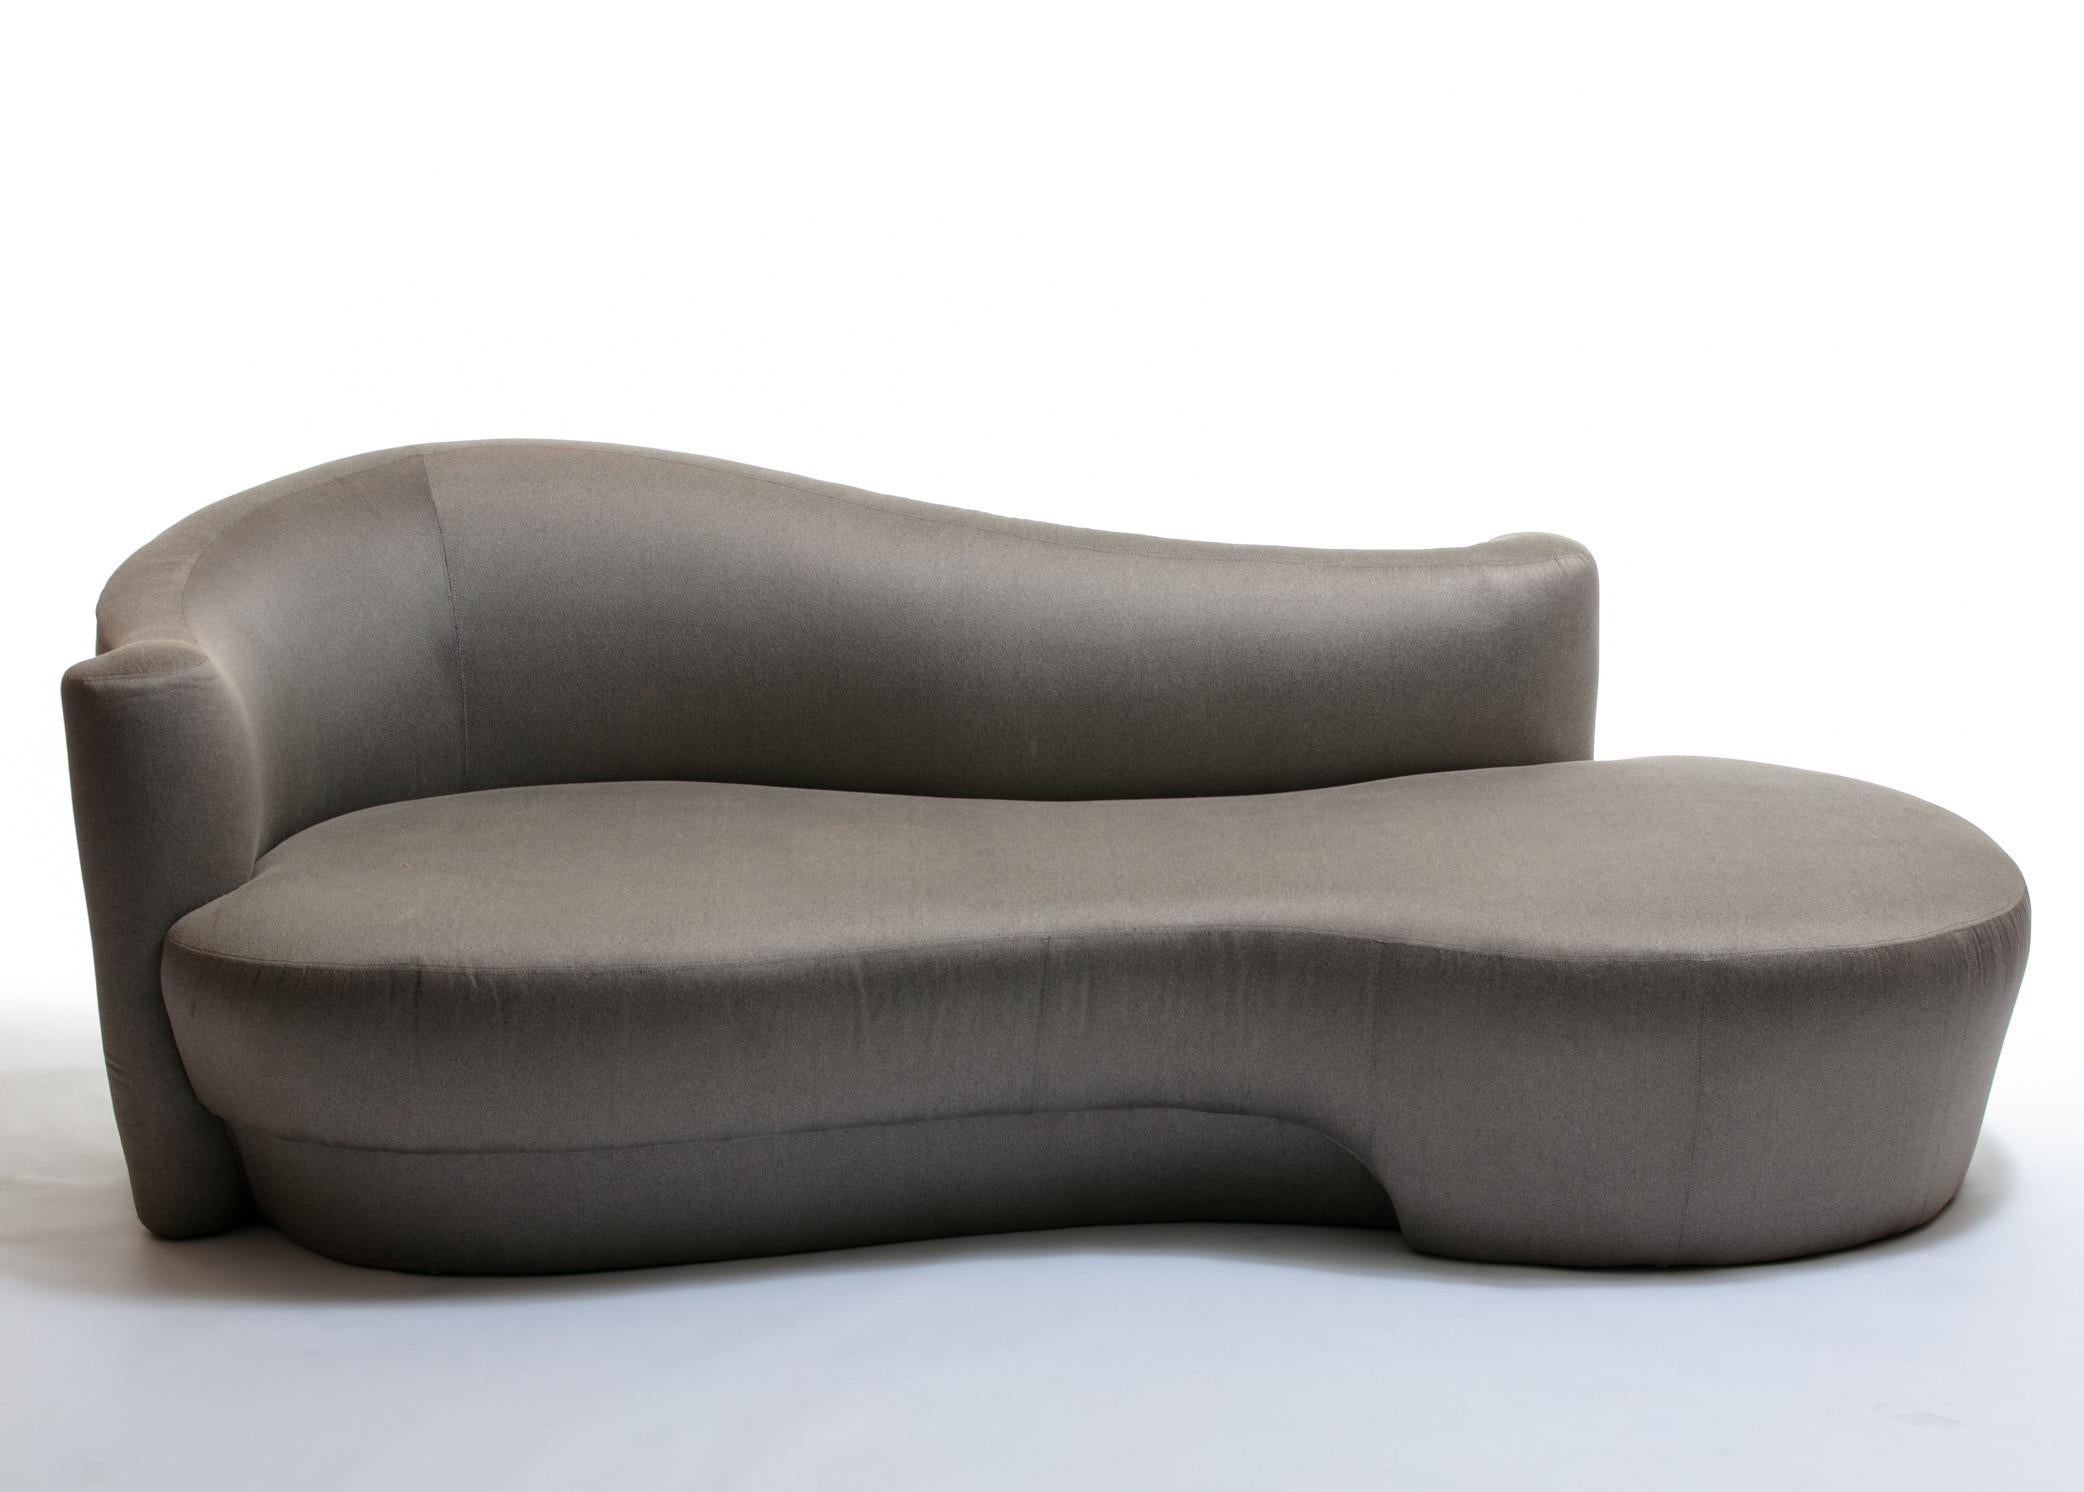 This chaise/sofa looks great from all angles. Sculptural, curvy, glamorous. Quite comfortable and reminiscent of cloud form sofa designs. Weiman label. Custom reupholstery available as an upgrade. We can see this in bouclé, velvet or even shearling.